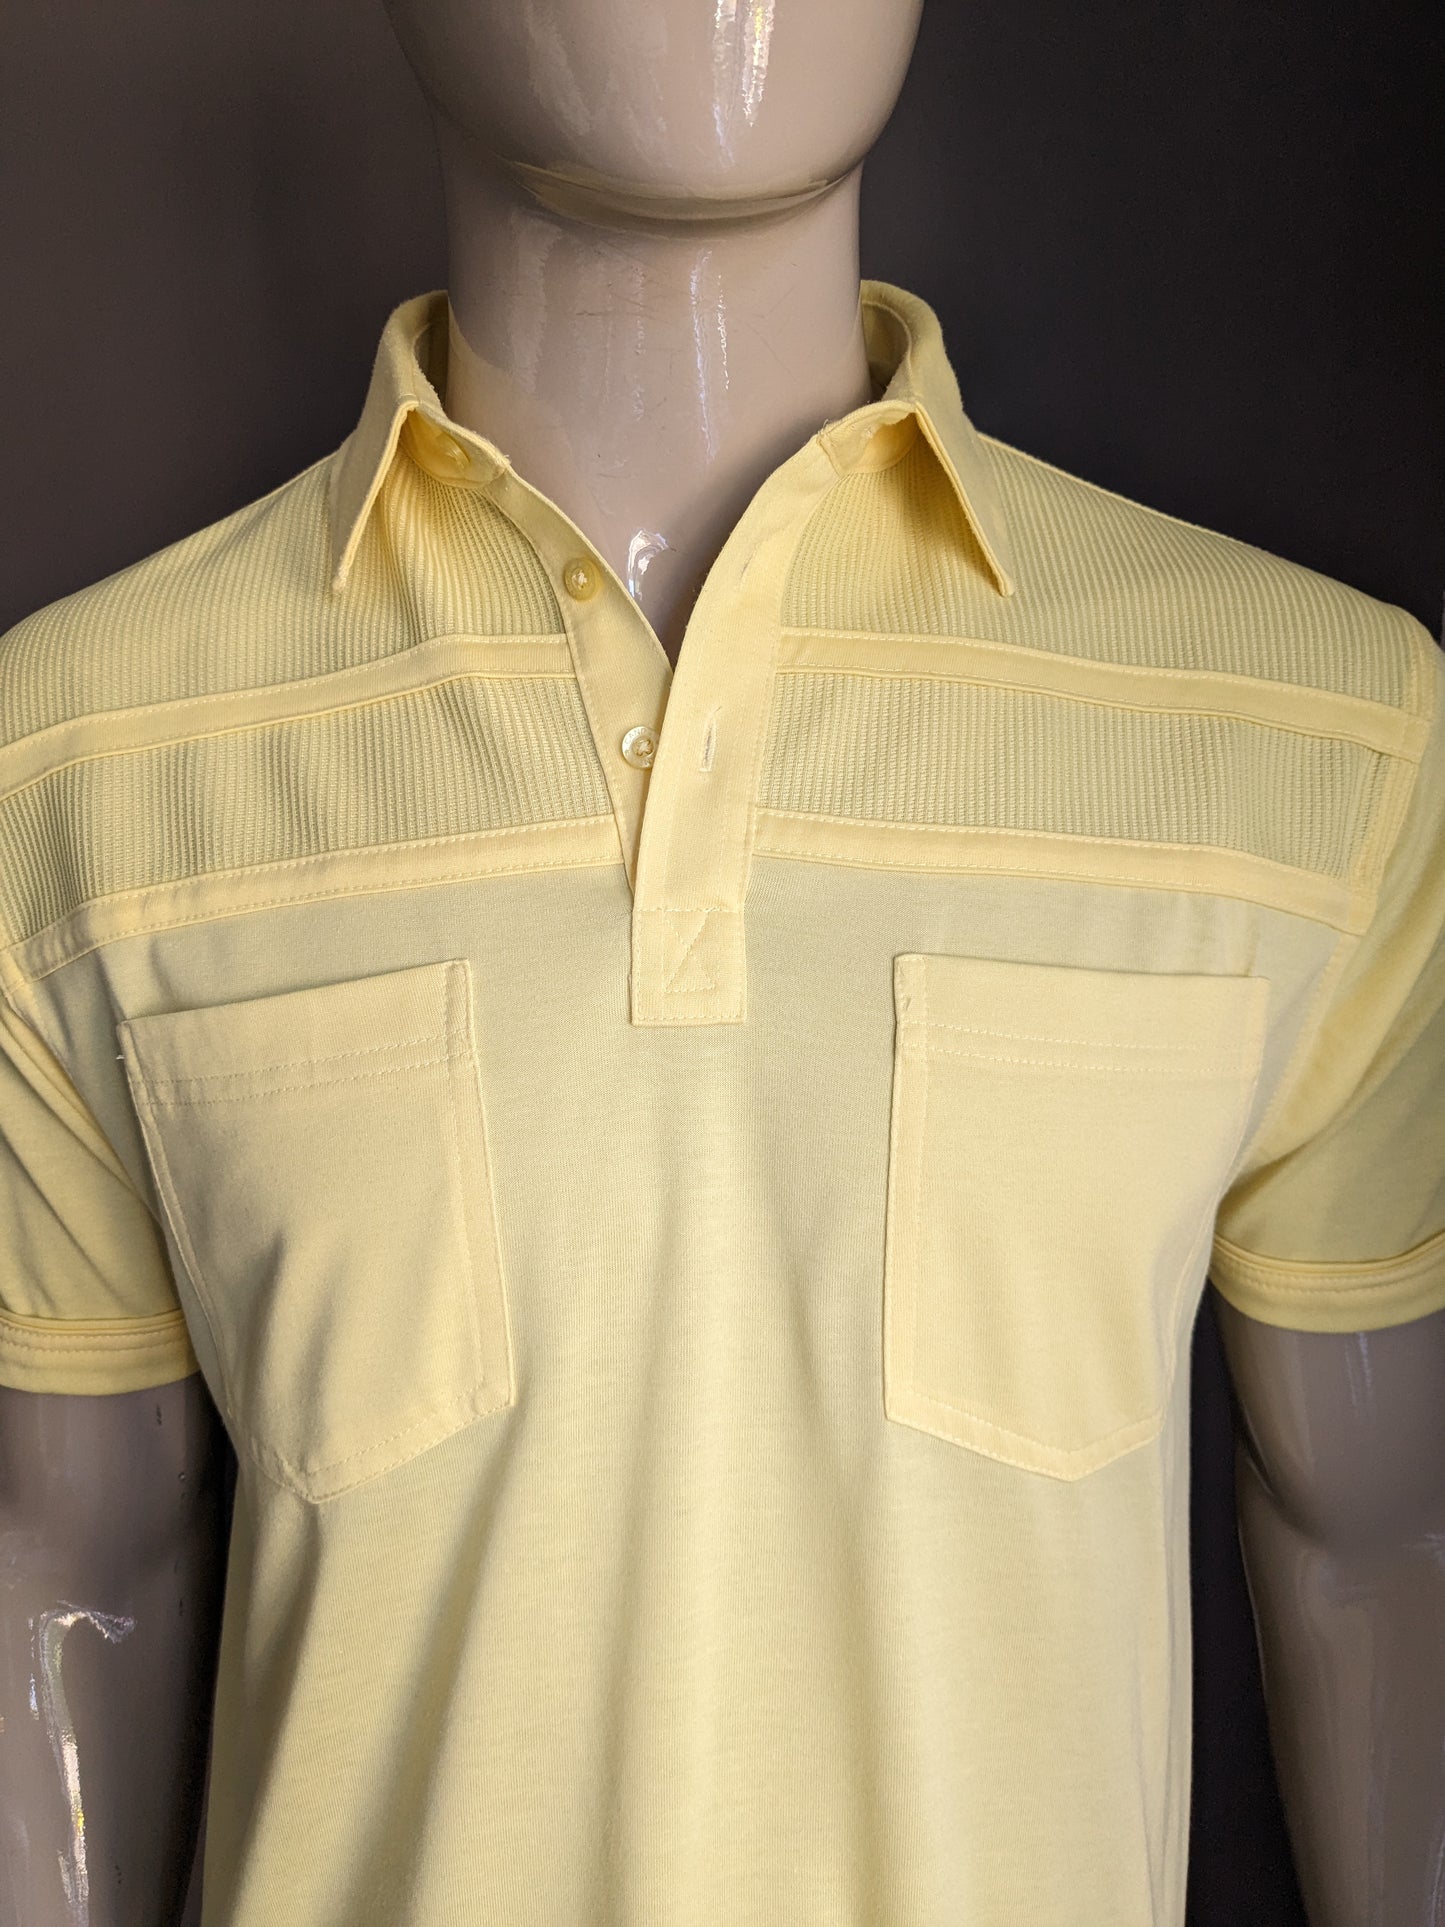 Vintage Canda Polo with elastic band. Yellow colored. Size M.